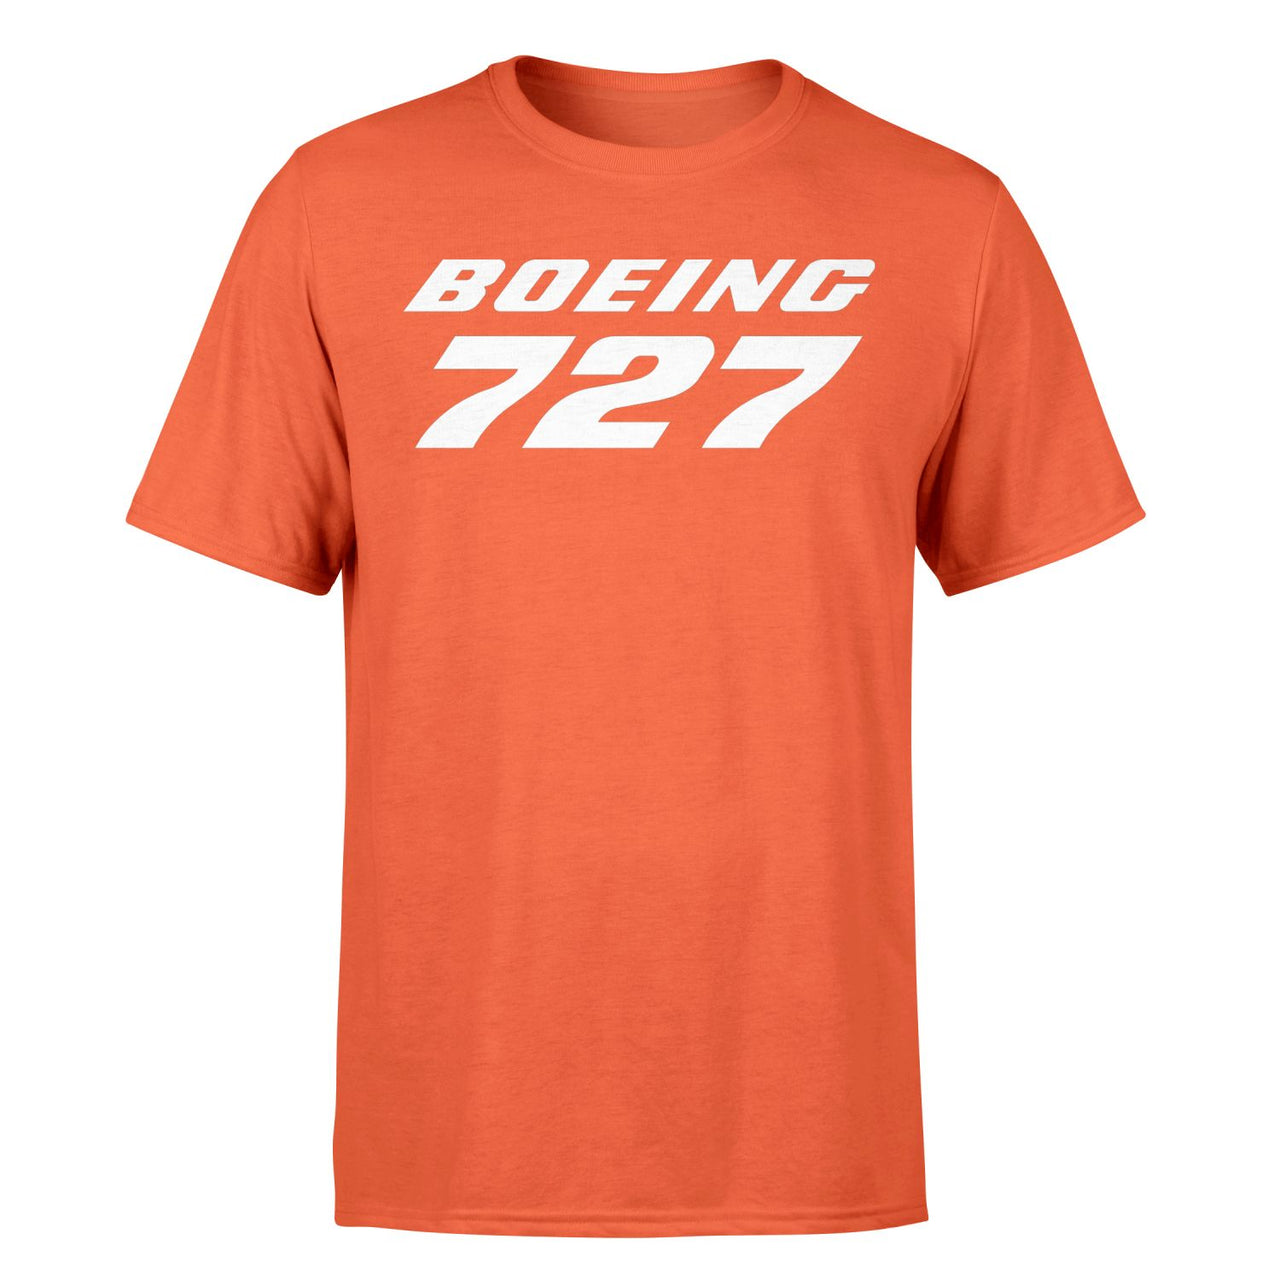 Boeing 727 & Text Designed T-Shirts